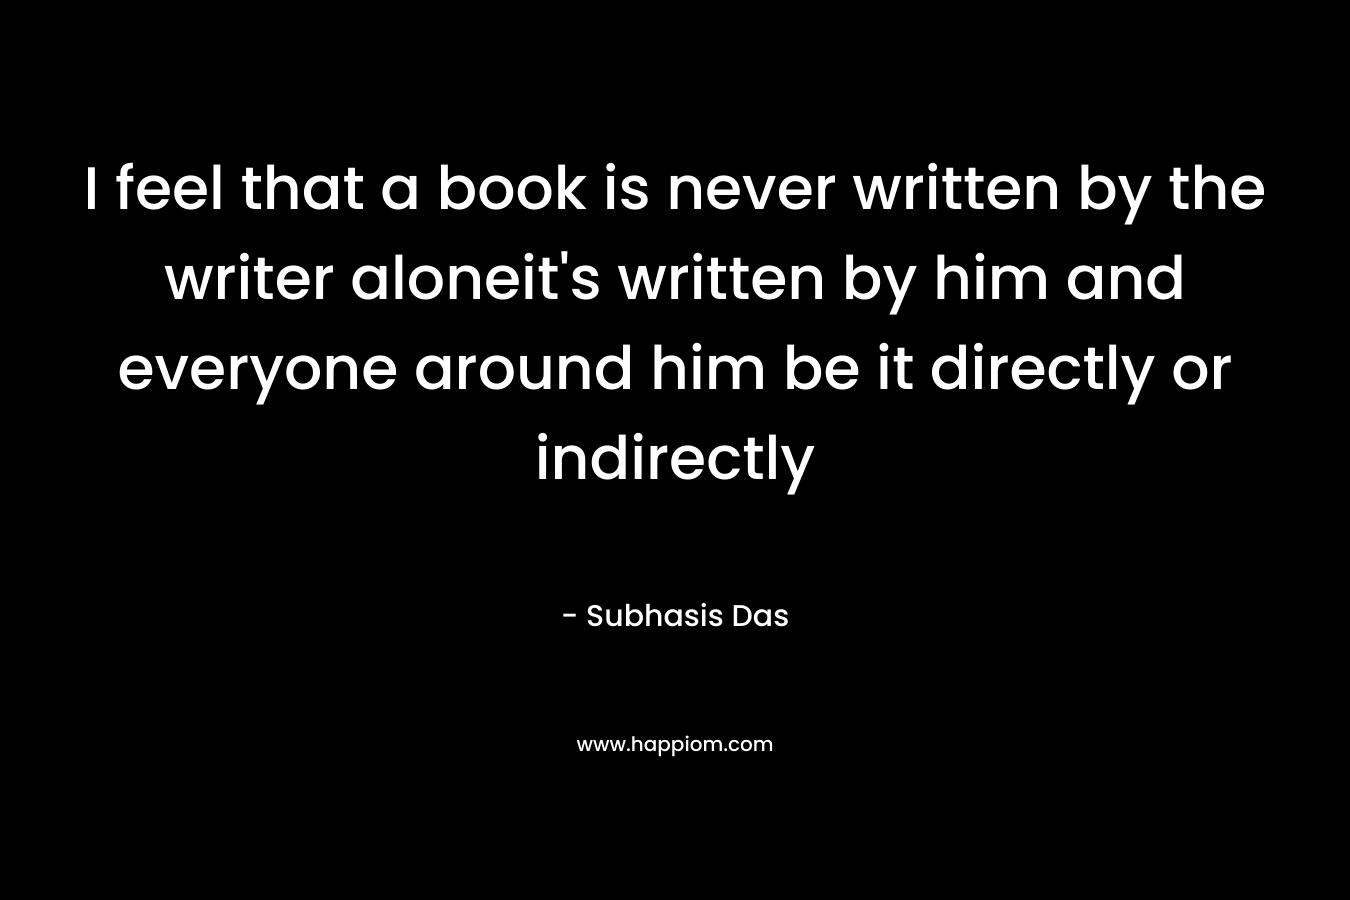 I feel that a book is never written by the writer aloneit's written by him and everyone around him be it directly or indirectly